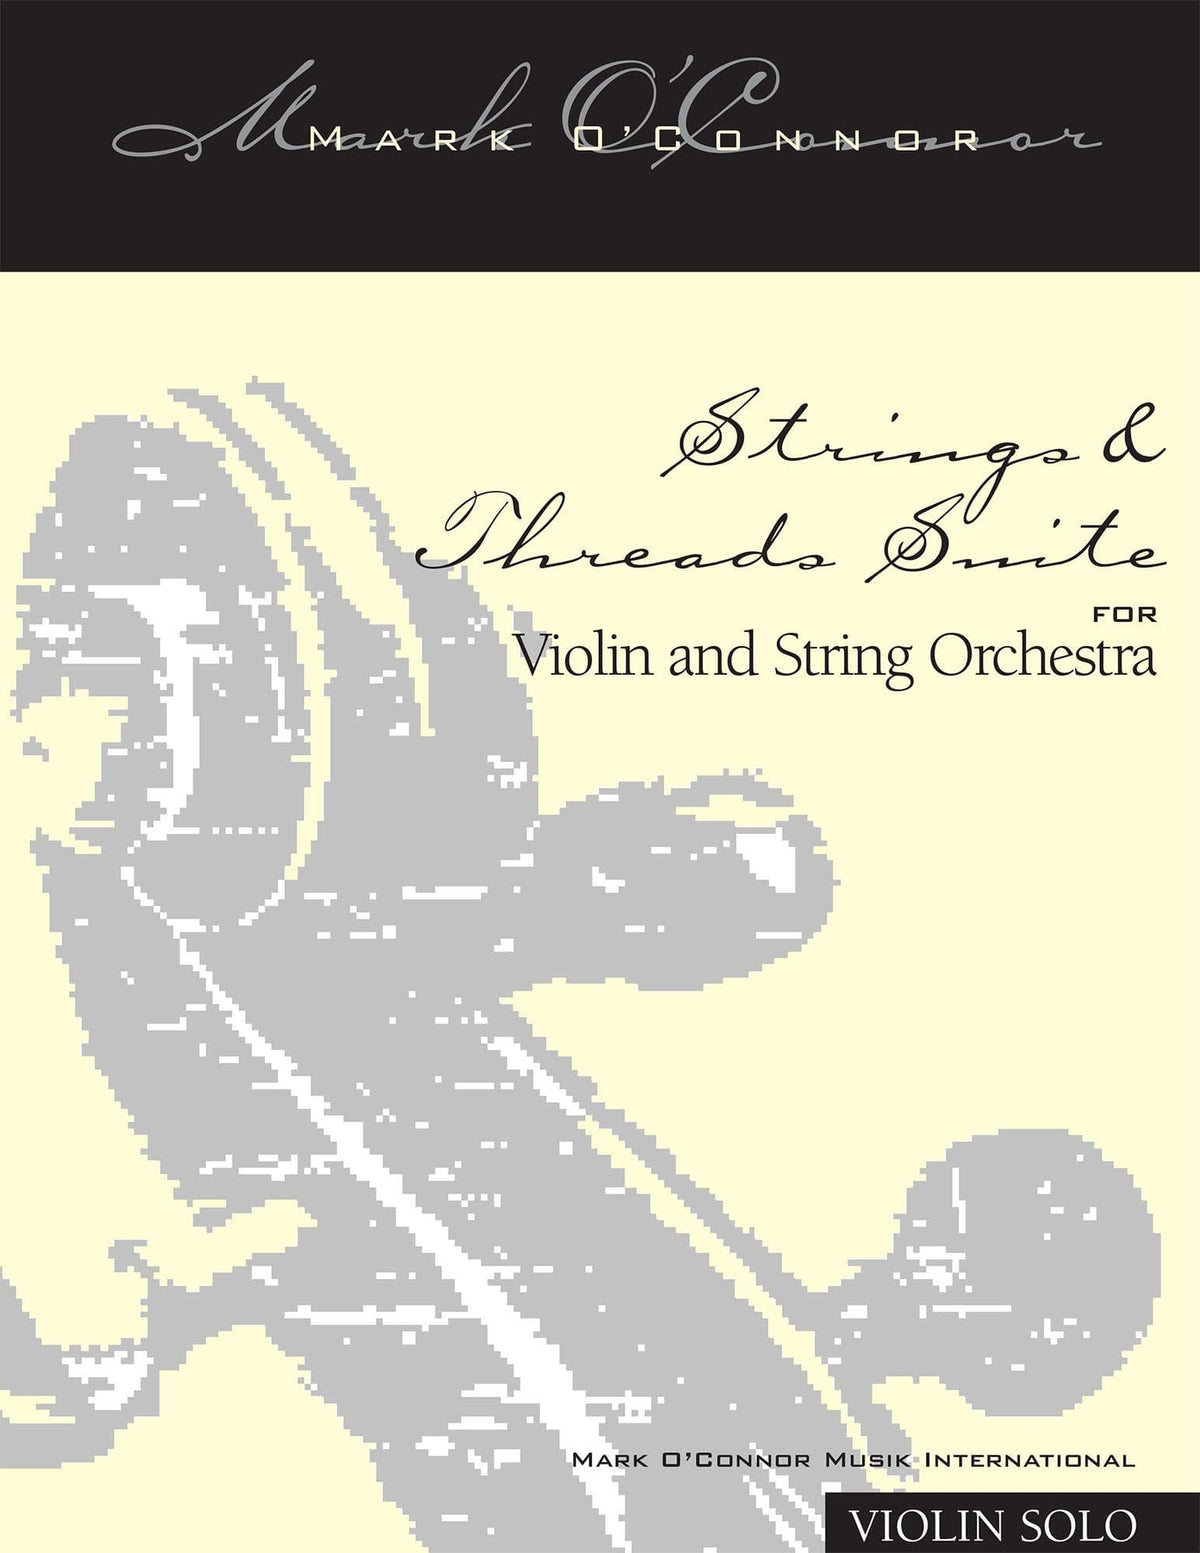 O'Connor, Mark - Strings & Threads Suite for Violin and String Orchestra - Violin Solo - Digital Download